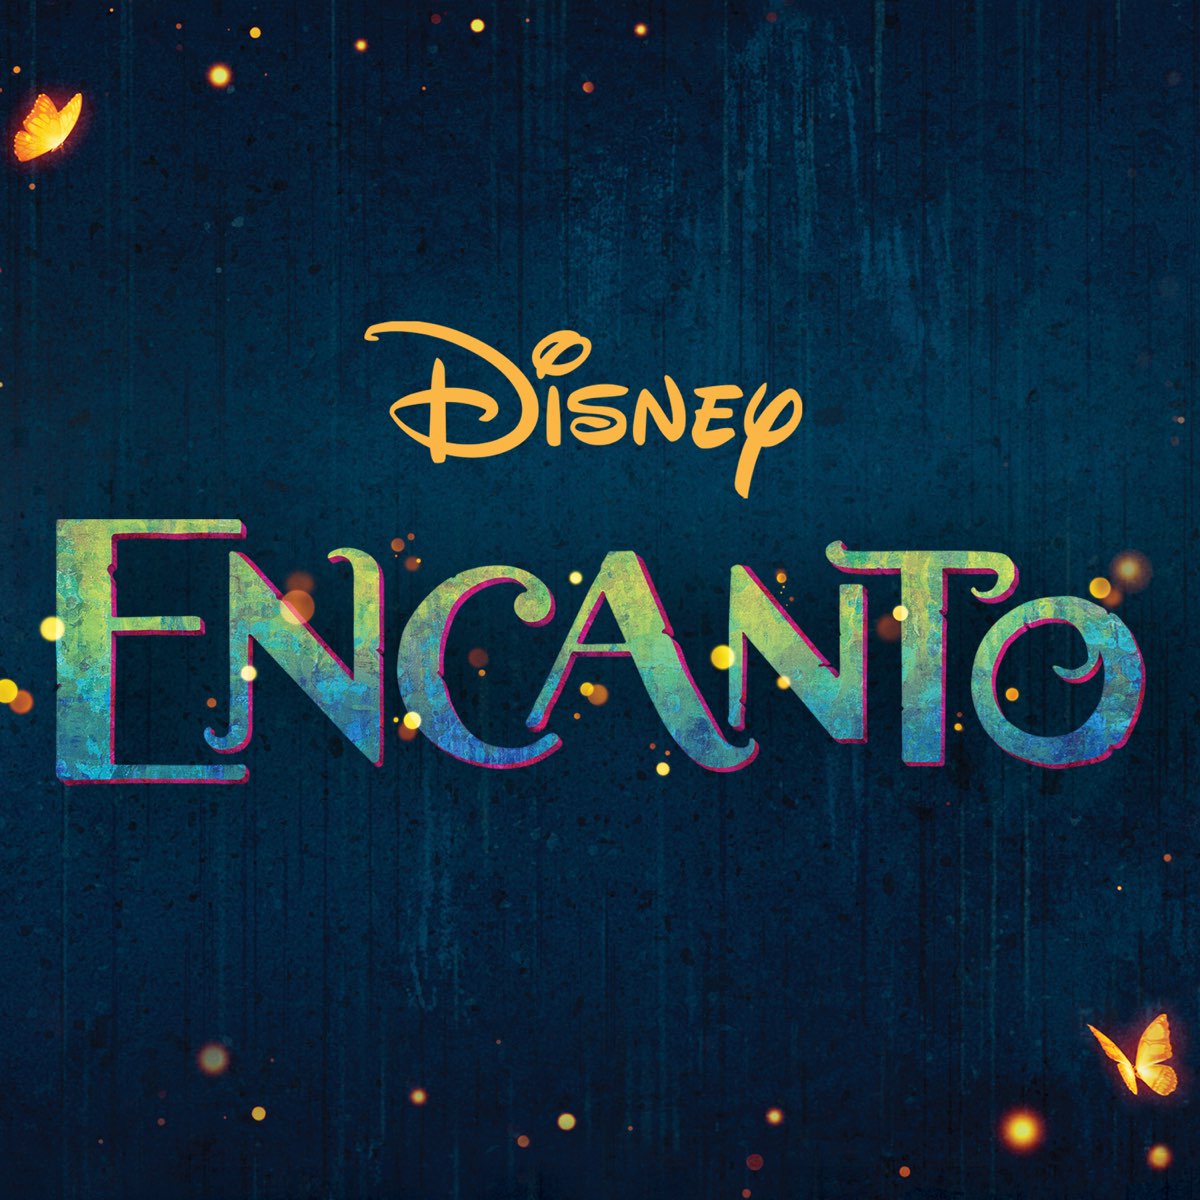 Encanto': The music, joy and superpower of a multigenerational